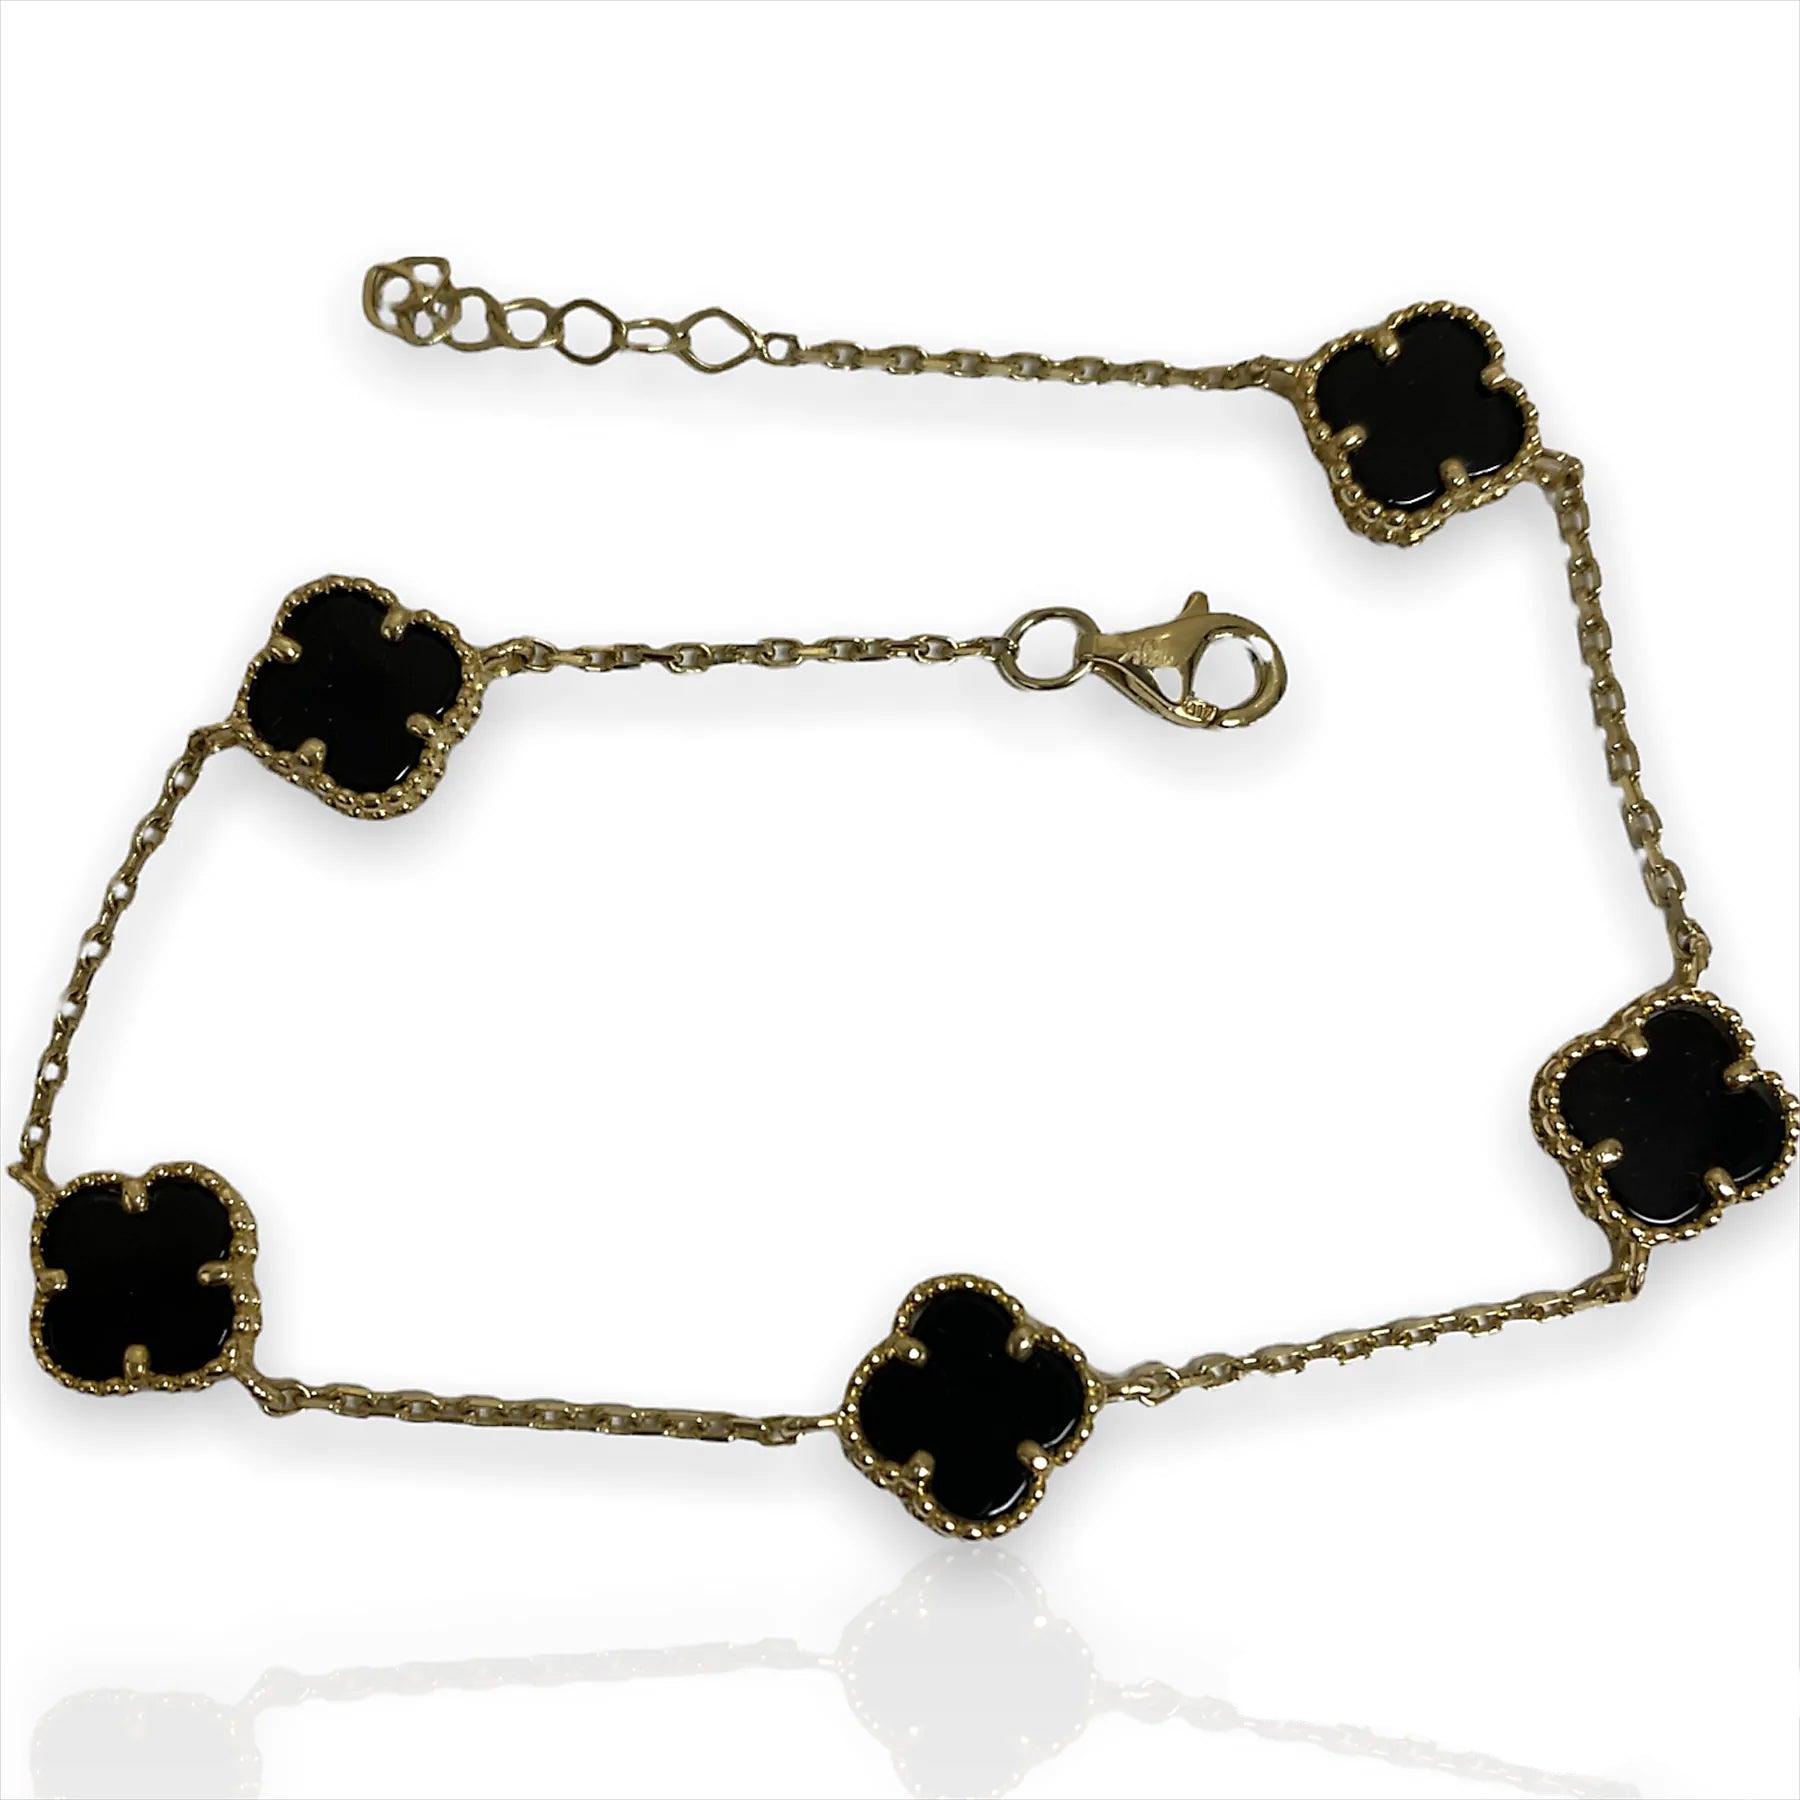 Color Blossom Open Bangle, Yellow Gold, White Gold, Onyx And